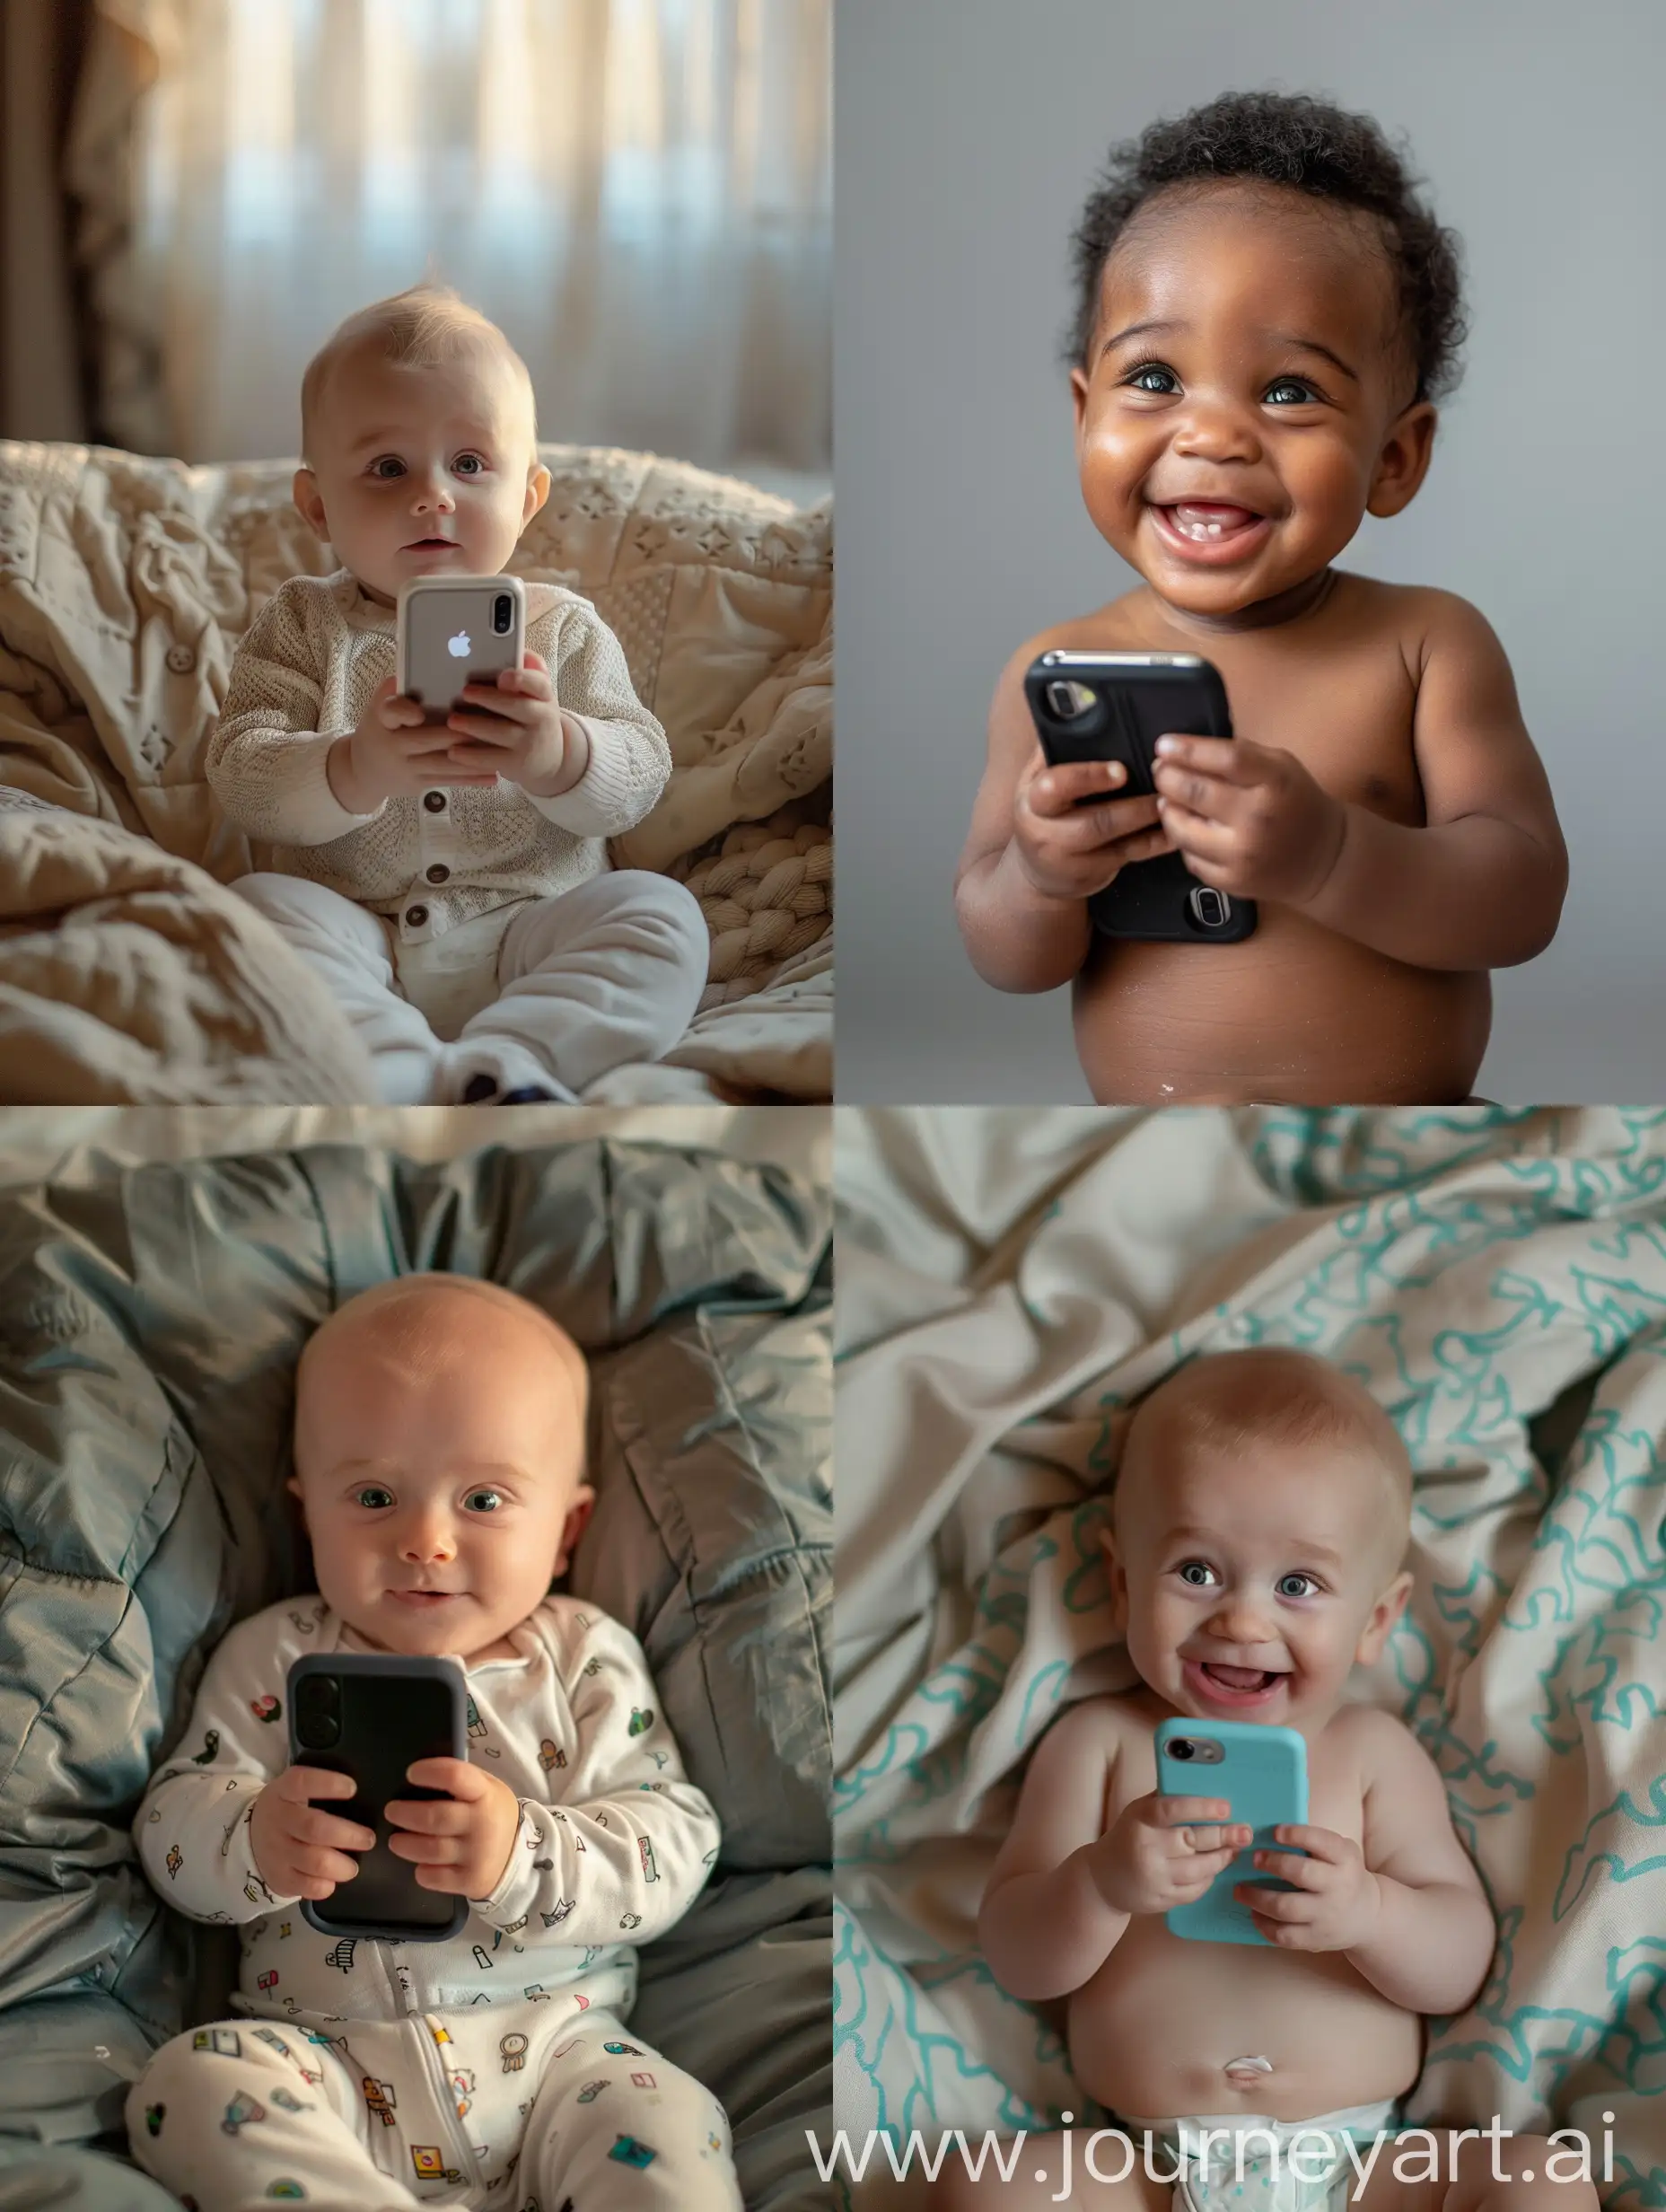 Curious-Infant-Holding-Smartphone